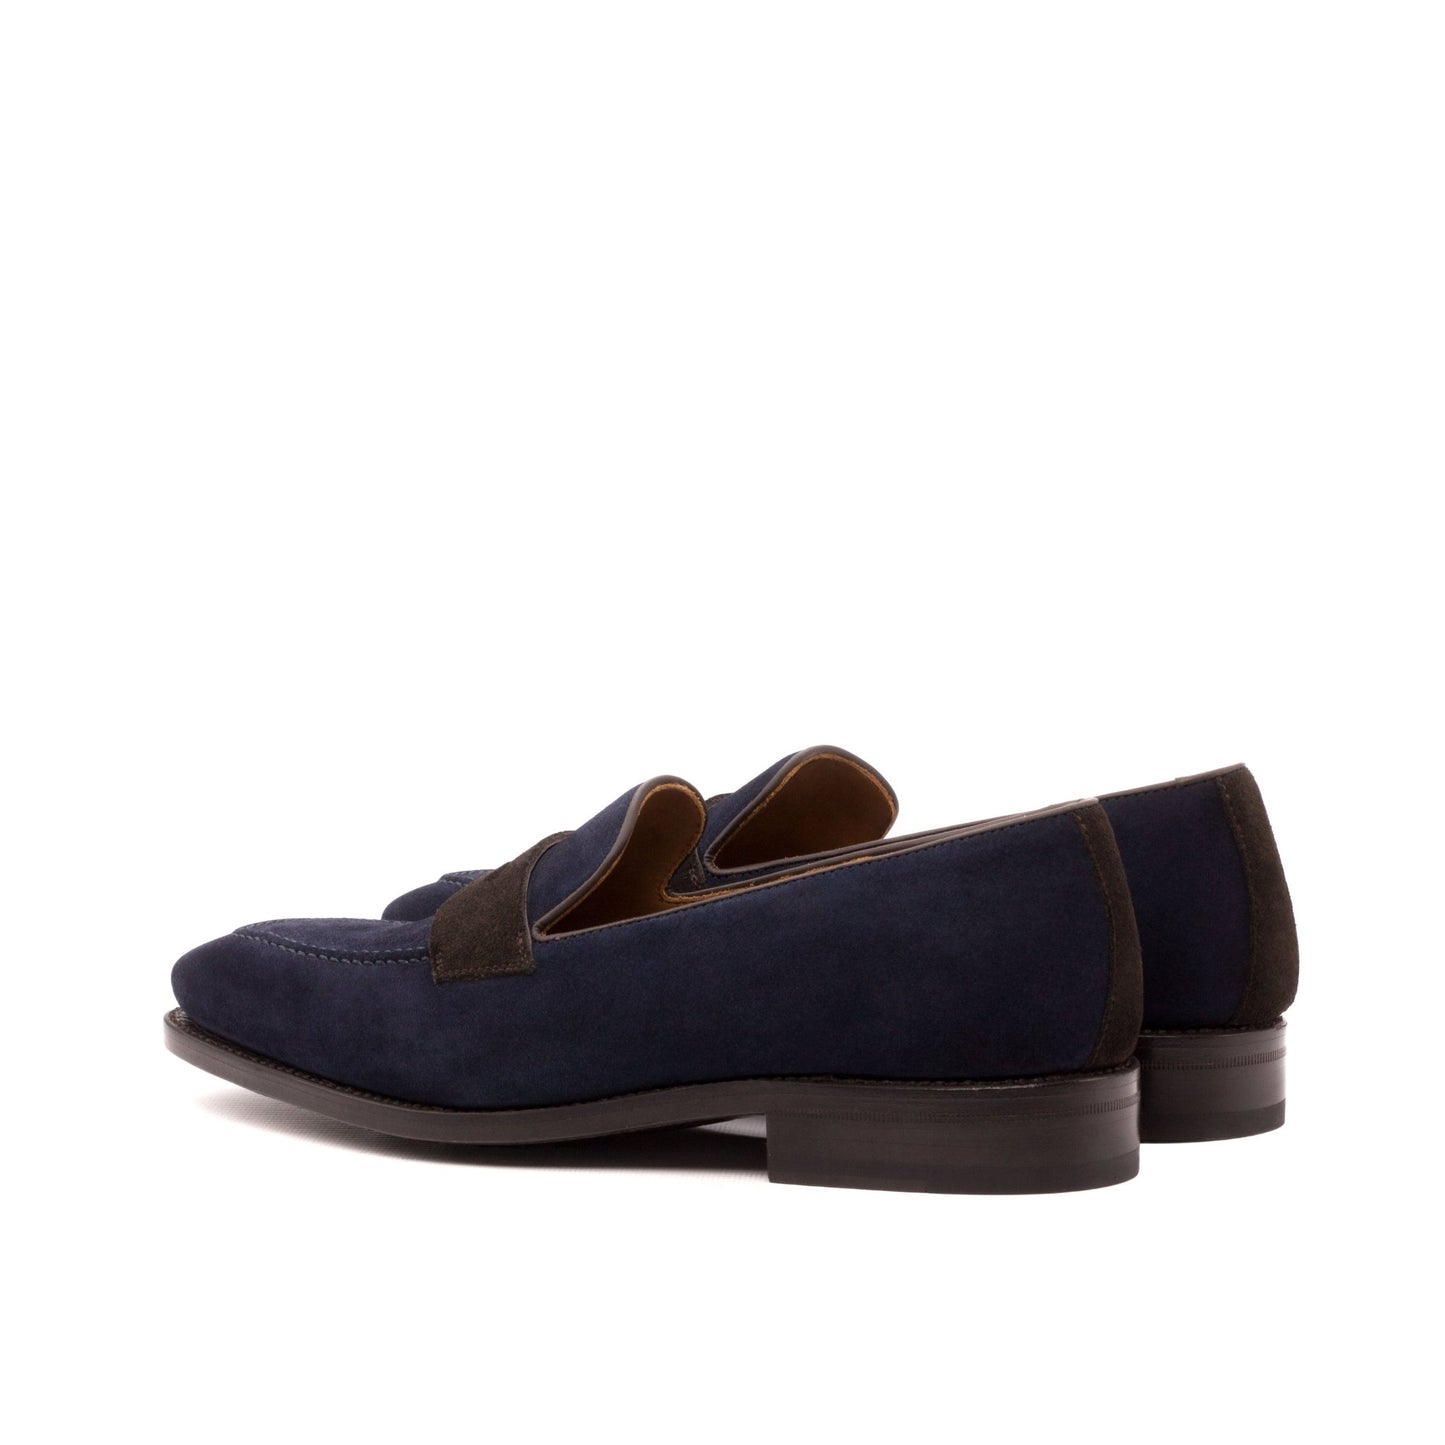 Penny Loafer in Navy and Brown Suede - Zatorres | Free Shipping on orders over $200